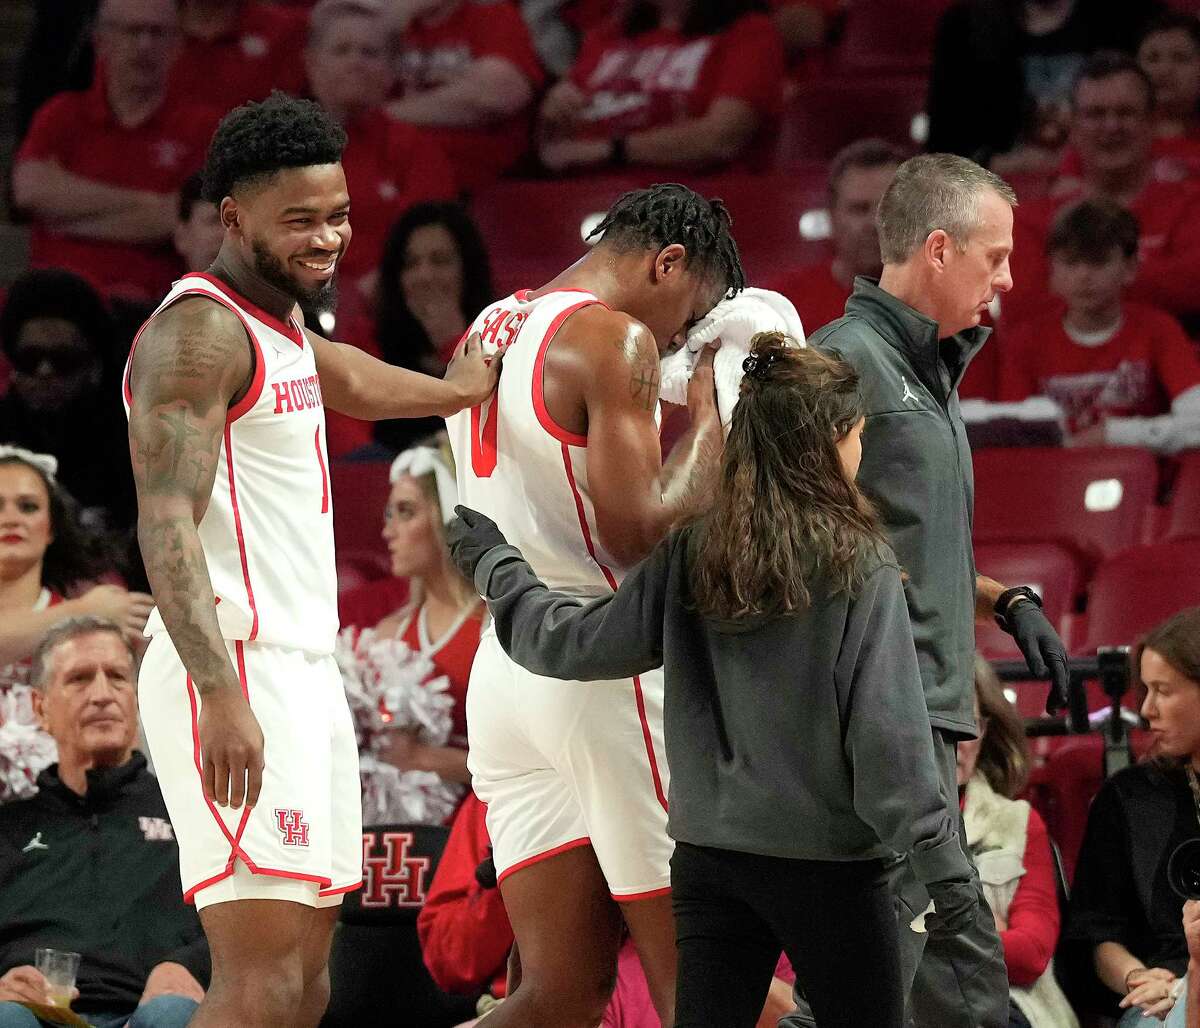 UH guard Marcus Sasseris helped off the court by a trainer after he sustained an injury to his face during the first half of Tuesday's game against North Florida.